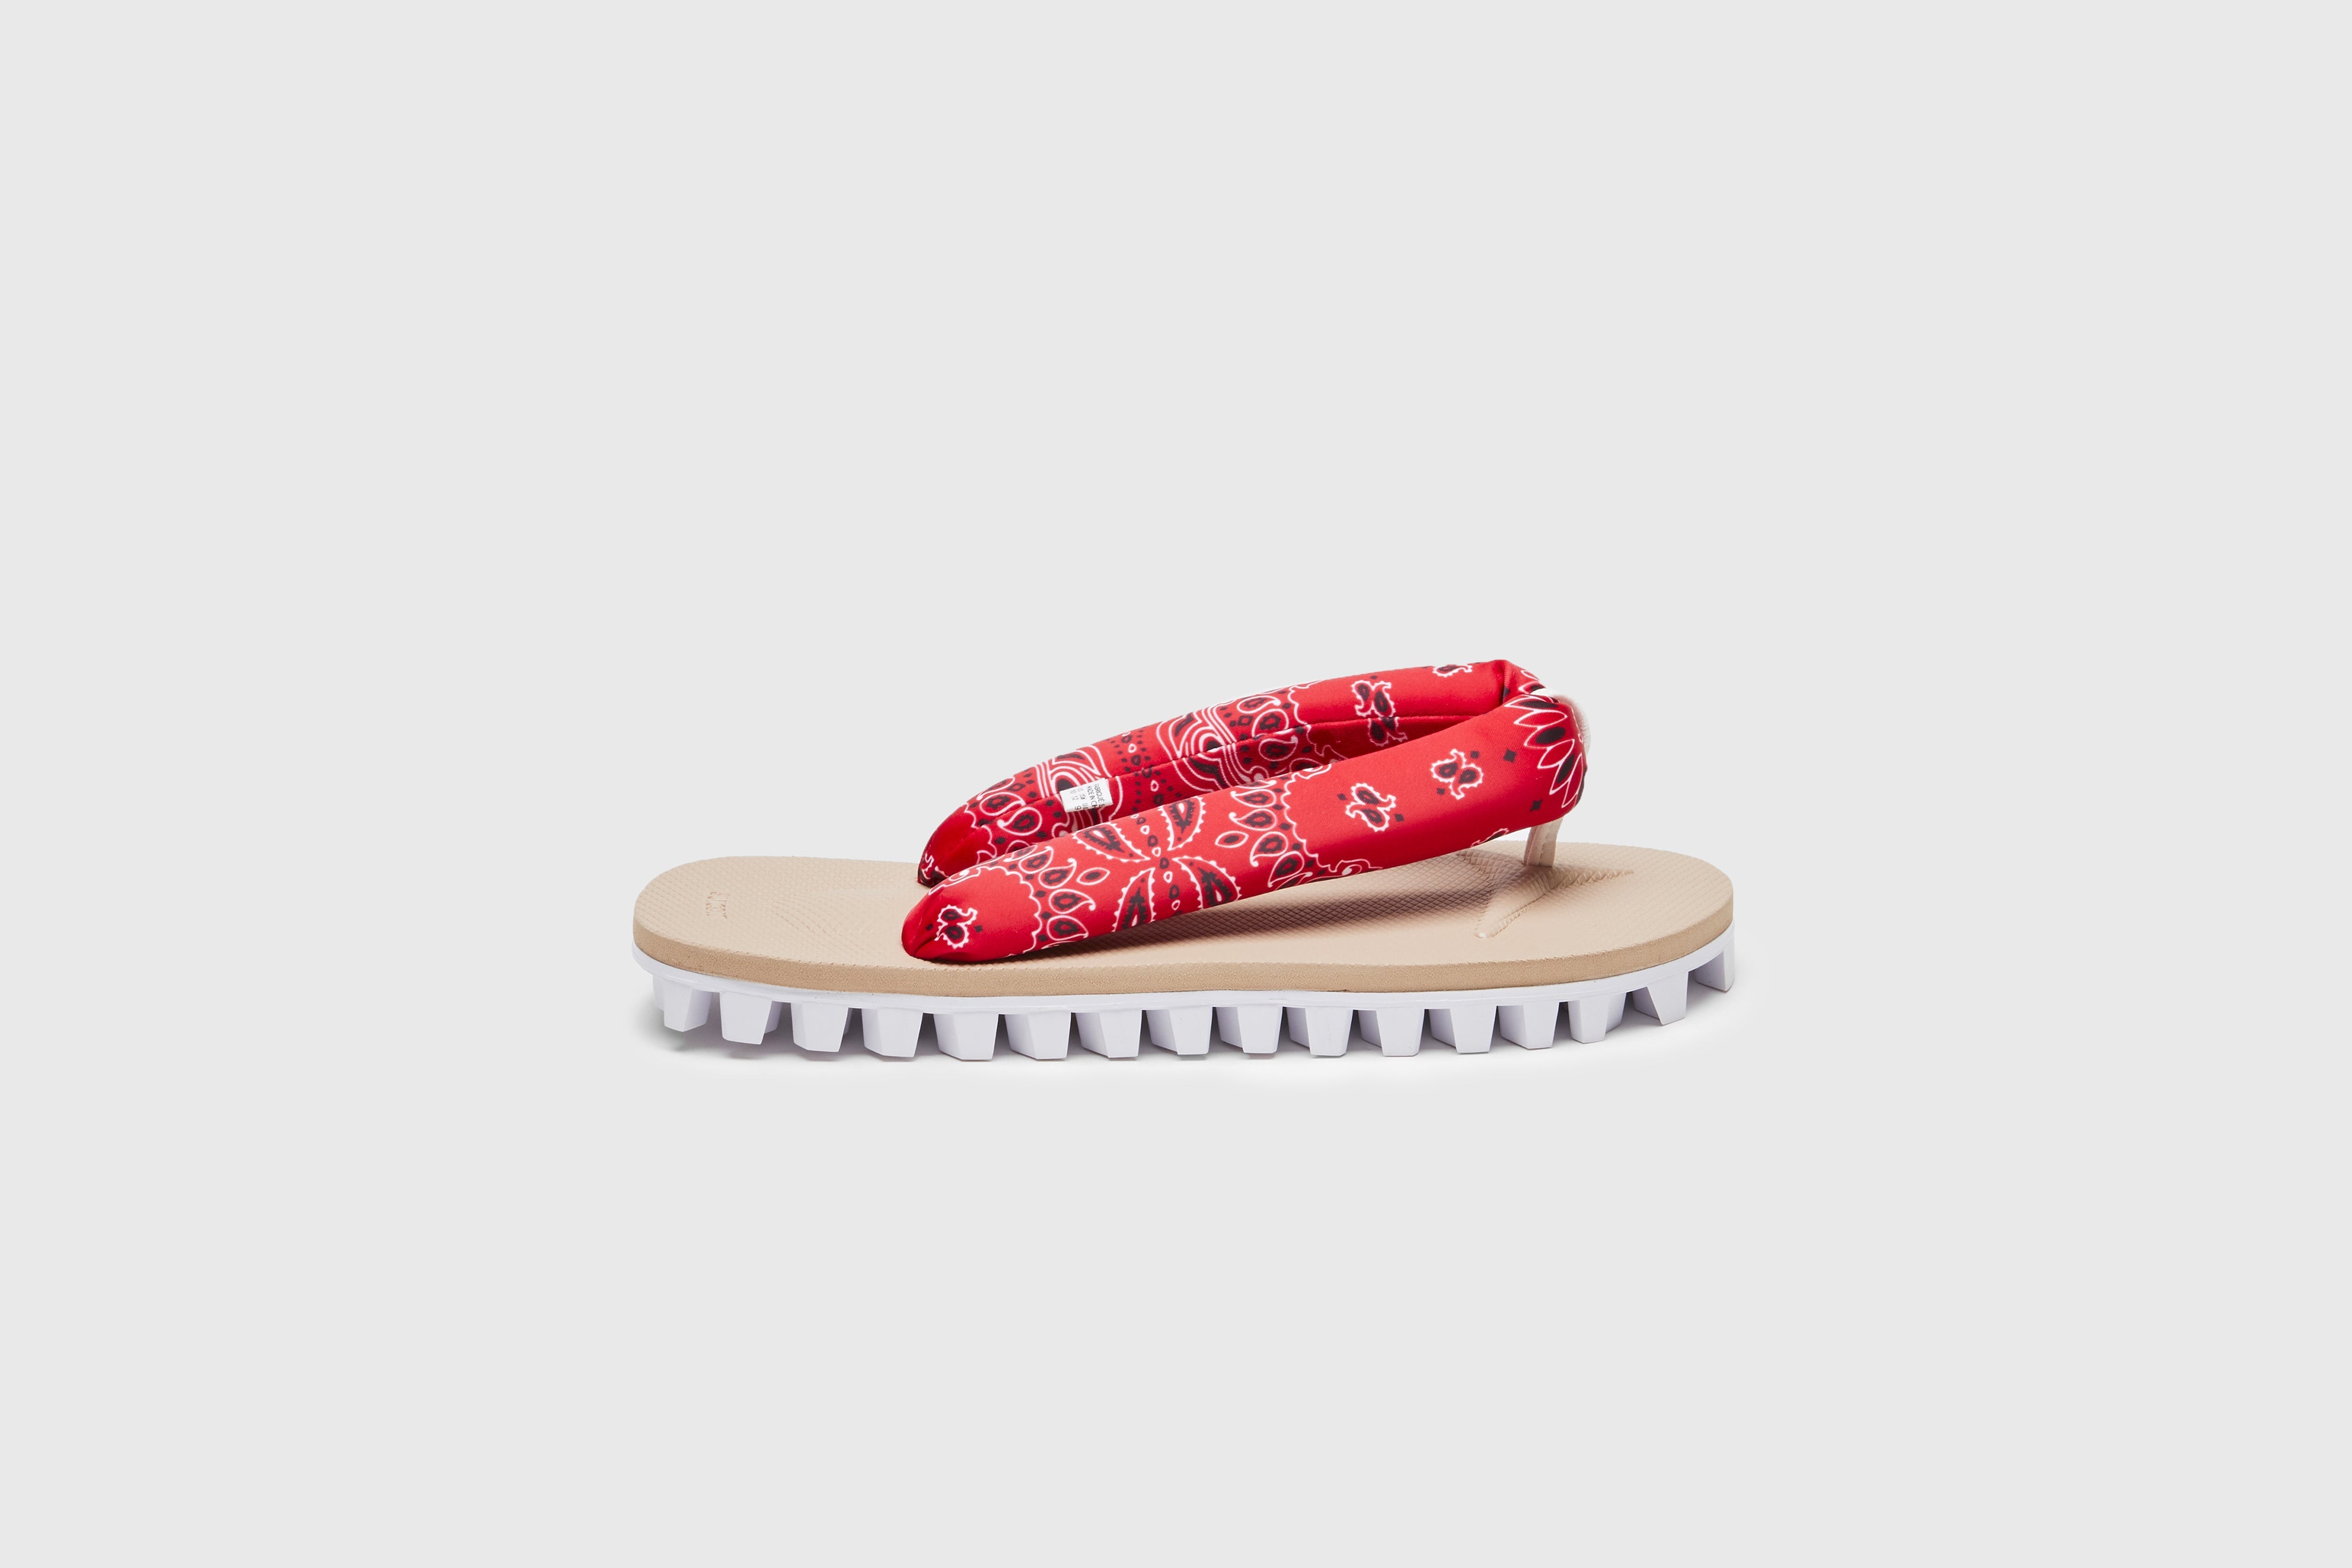 SUICOKE GTA-PT05 sandals with red &amp; beige nylon upper, red &amp; beige midsole and sole, strap and logo patch. From Spring/Summer 2023 collection on eightywingold Web Store, an official partner of SUICOKE. OG-226-PT05 RED X BEIGE